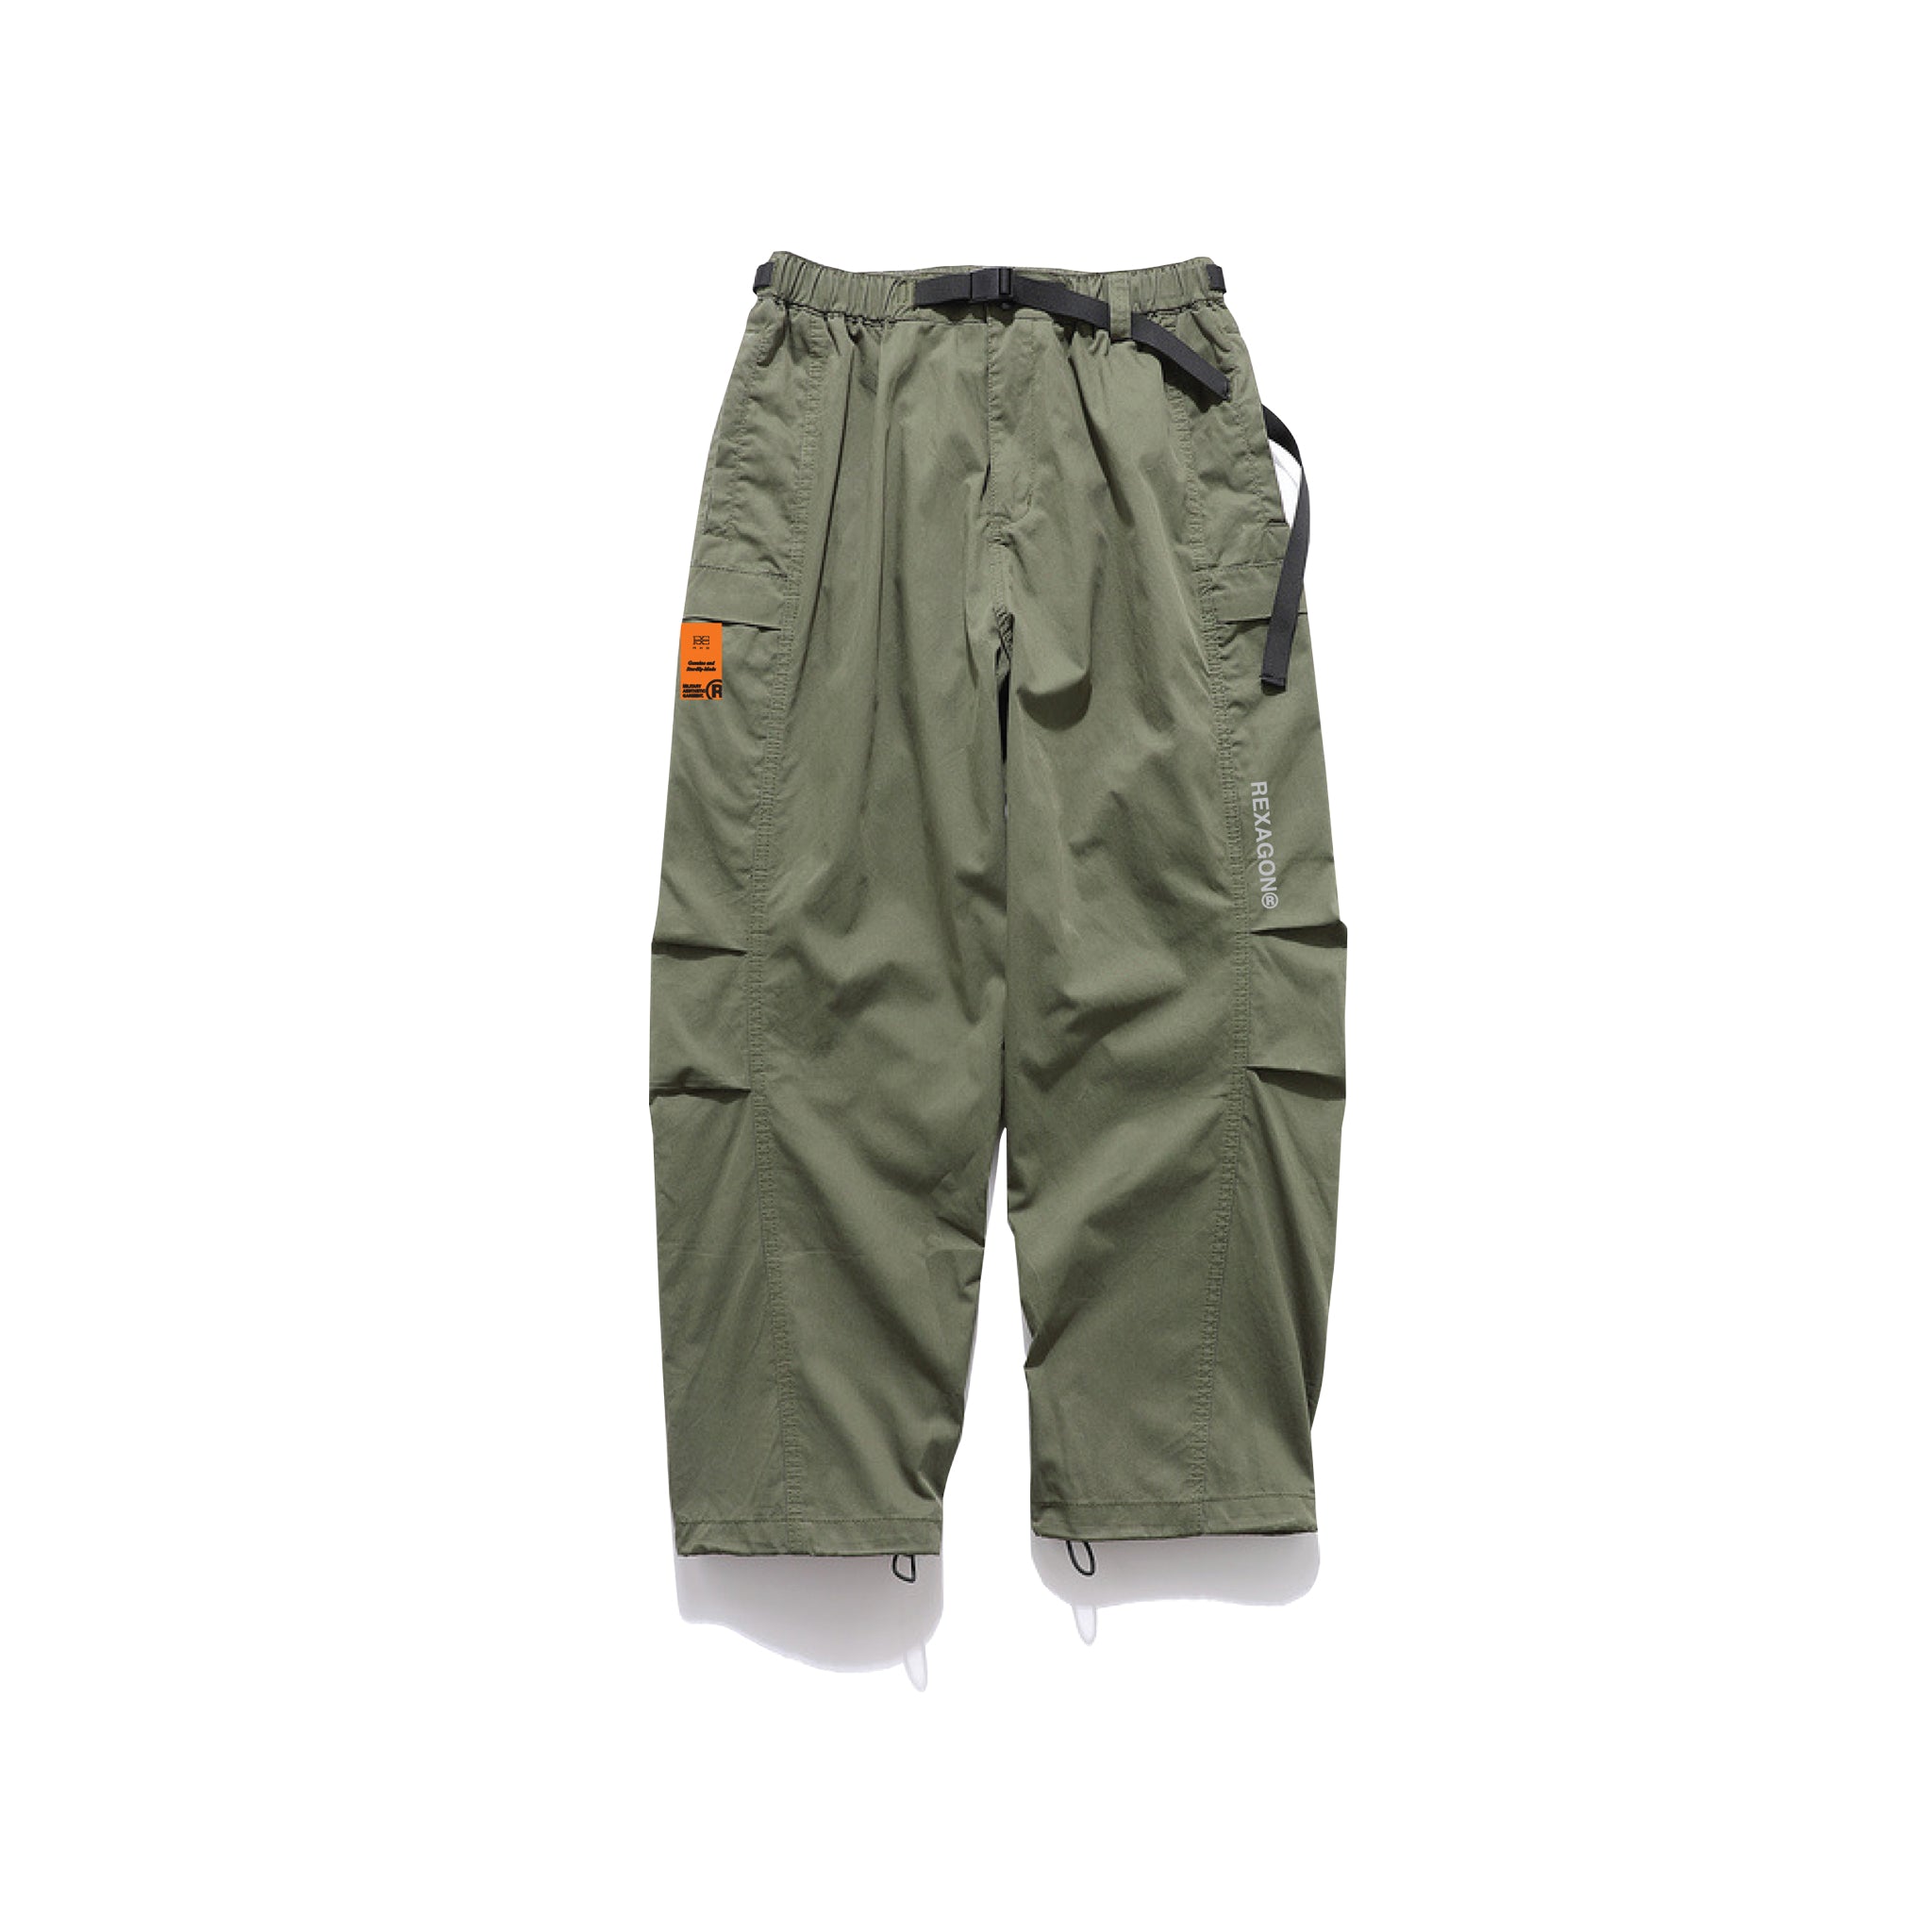 Wide Fit Parachute Pants - Olive Green